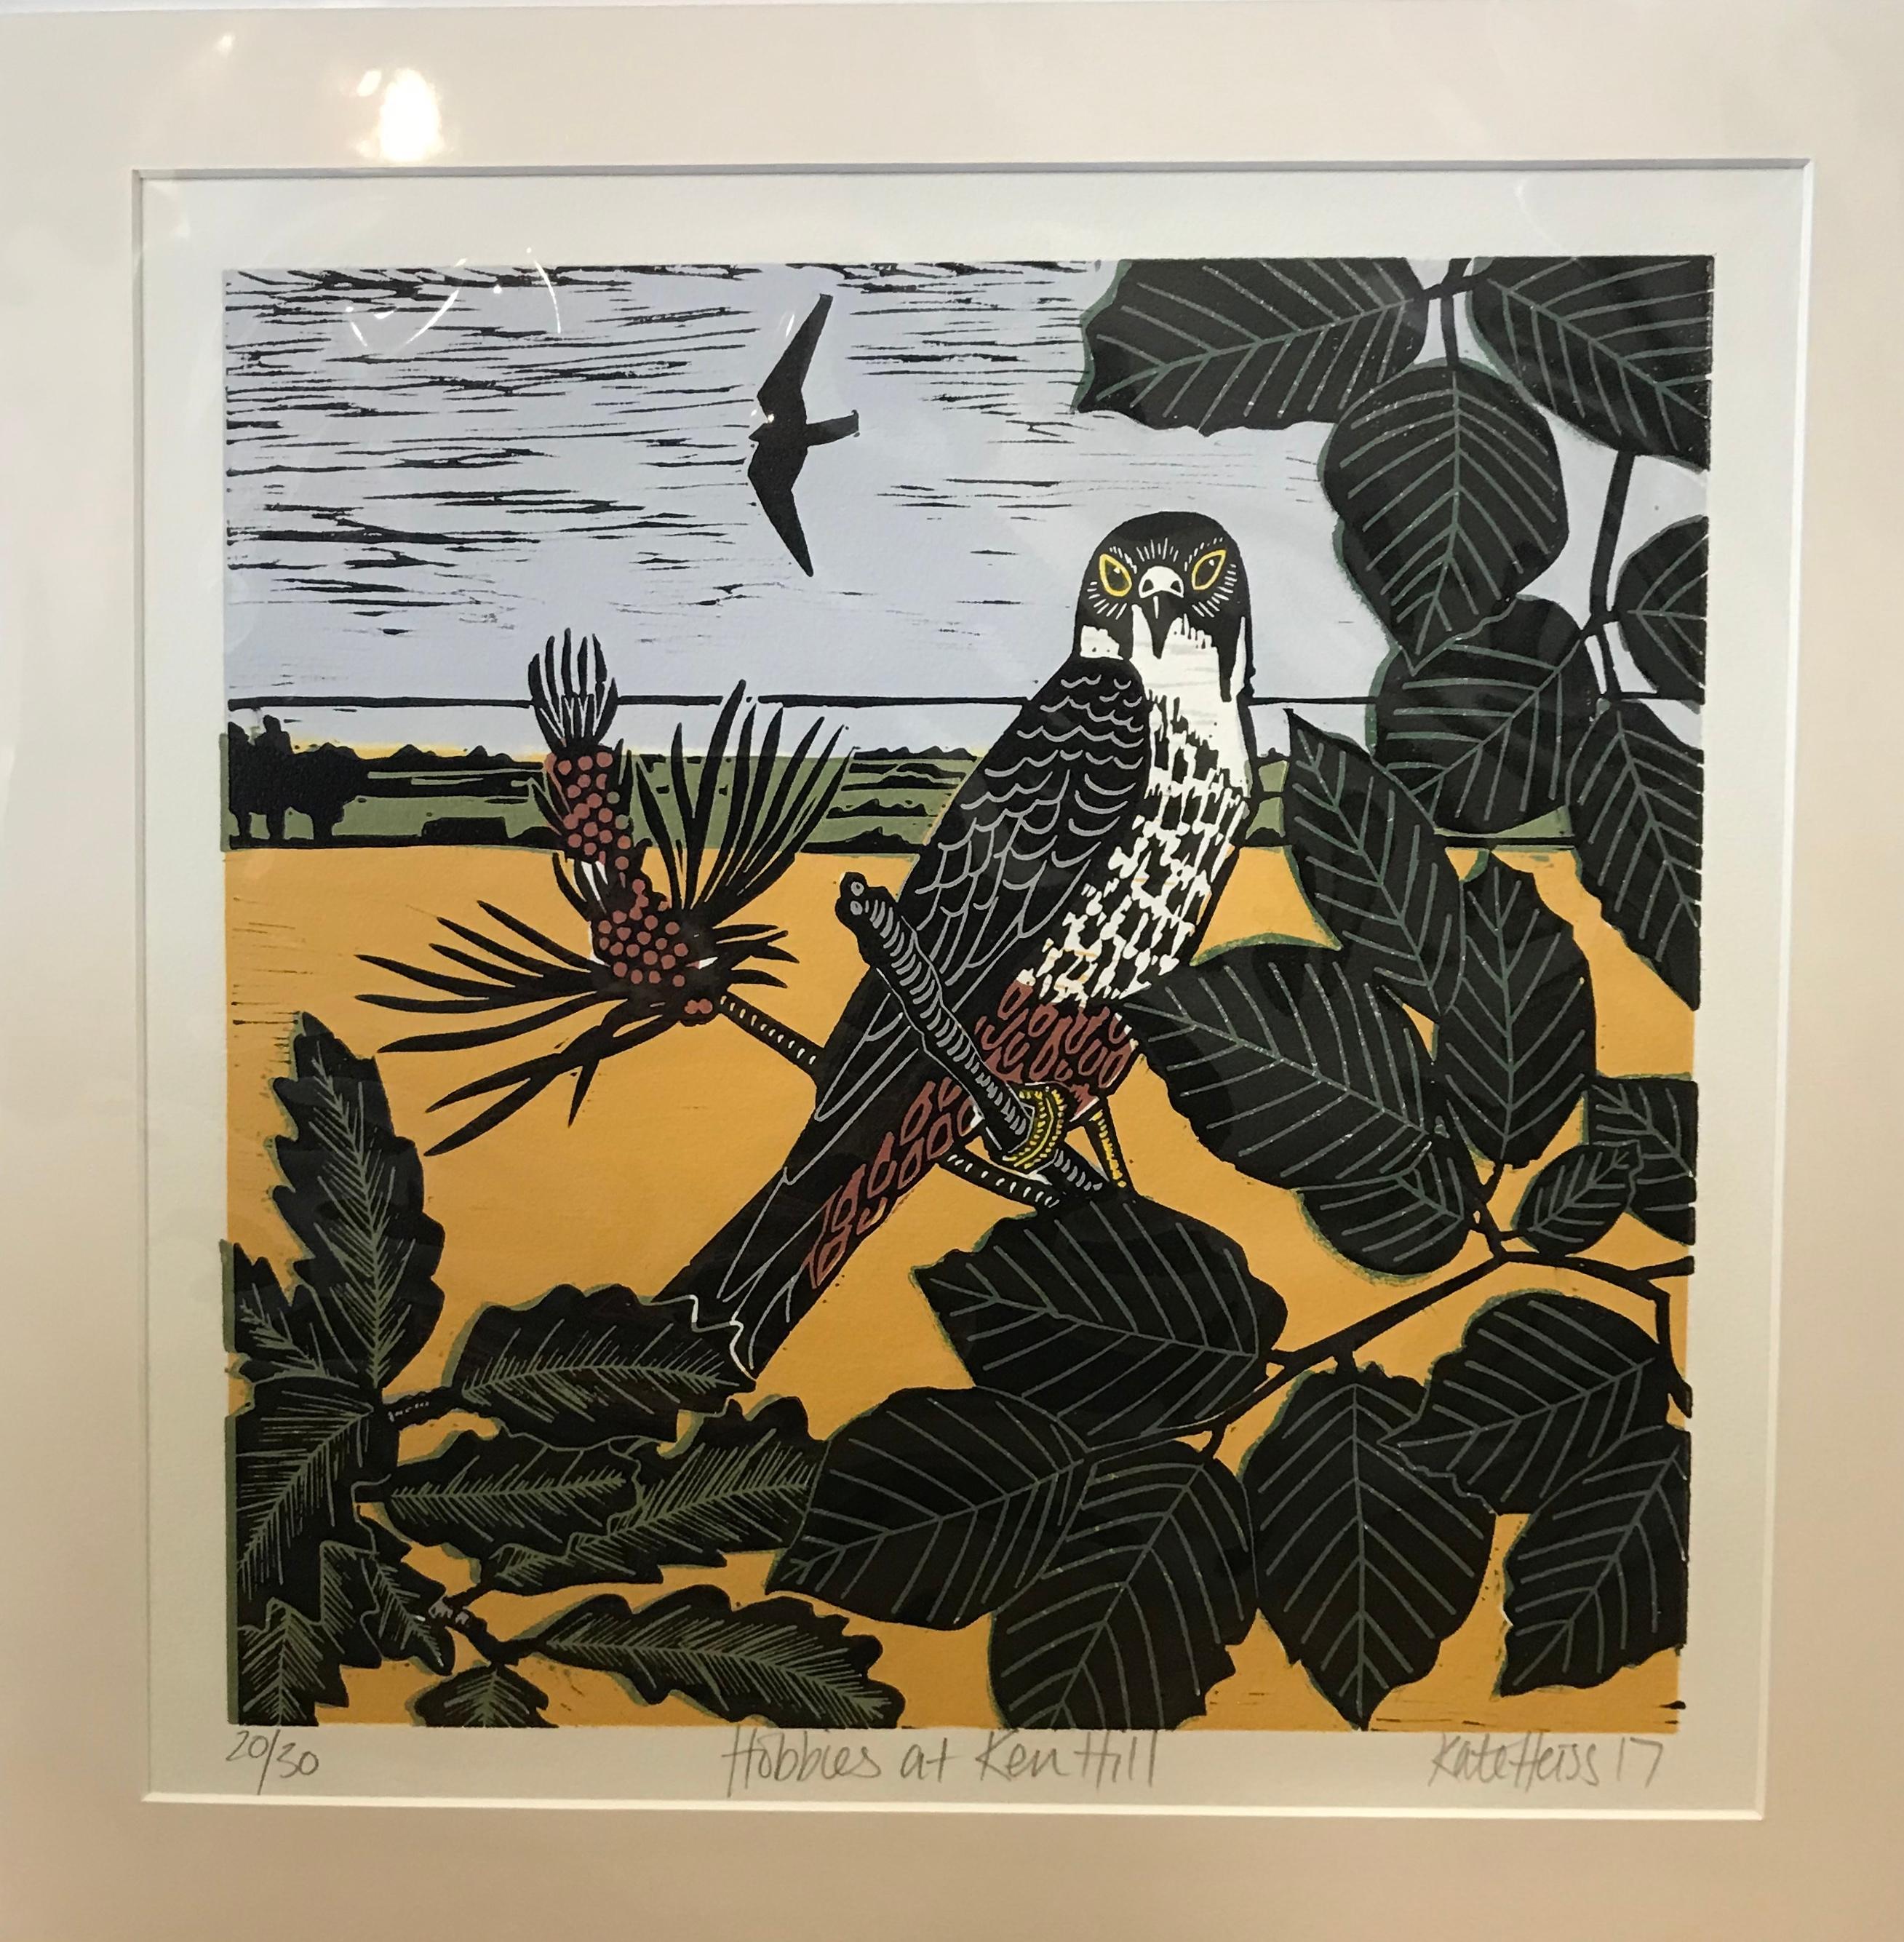 Kate Heiss
Hobbies at Ken Hill
Limited Edition Print
Edition of 30
Image Size: H 30cm x W 30cm
Mount Size: H 40cm x W 40cm
Signed
Sold Unframed

Please note that in situ images are purely an indication of how a piece may look.

Hobbies at Ken Hill